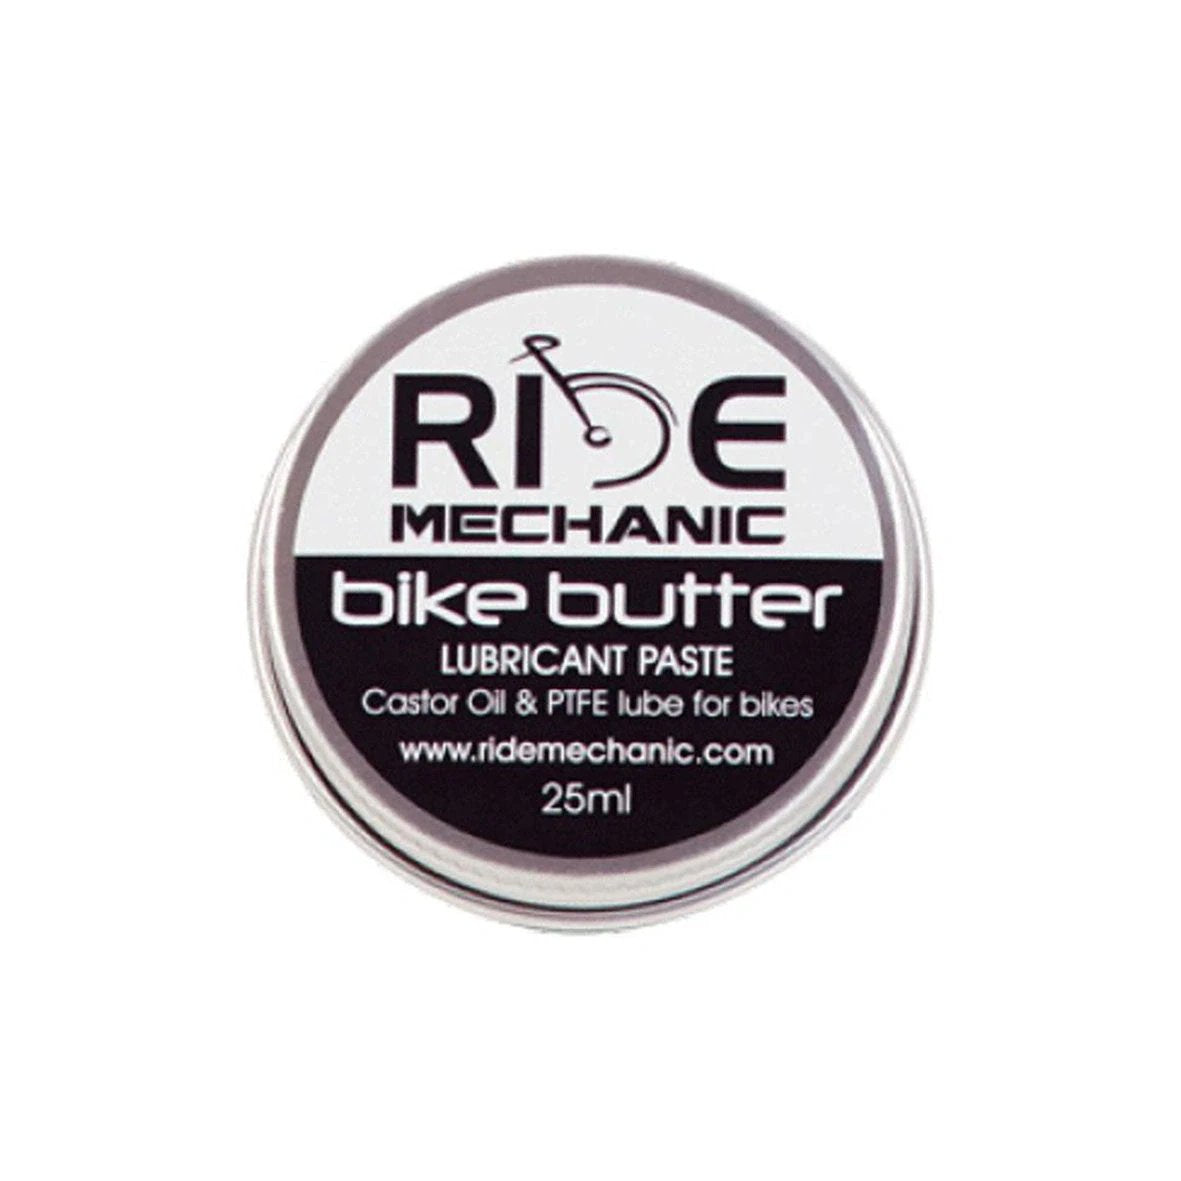 Ride-M Bike Butter 25Ml Lubricant - Bicycle Chain Oil